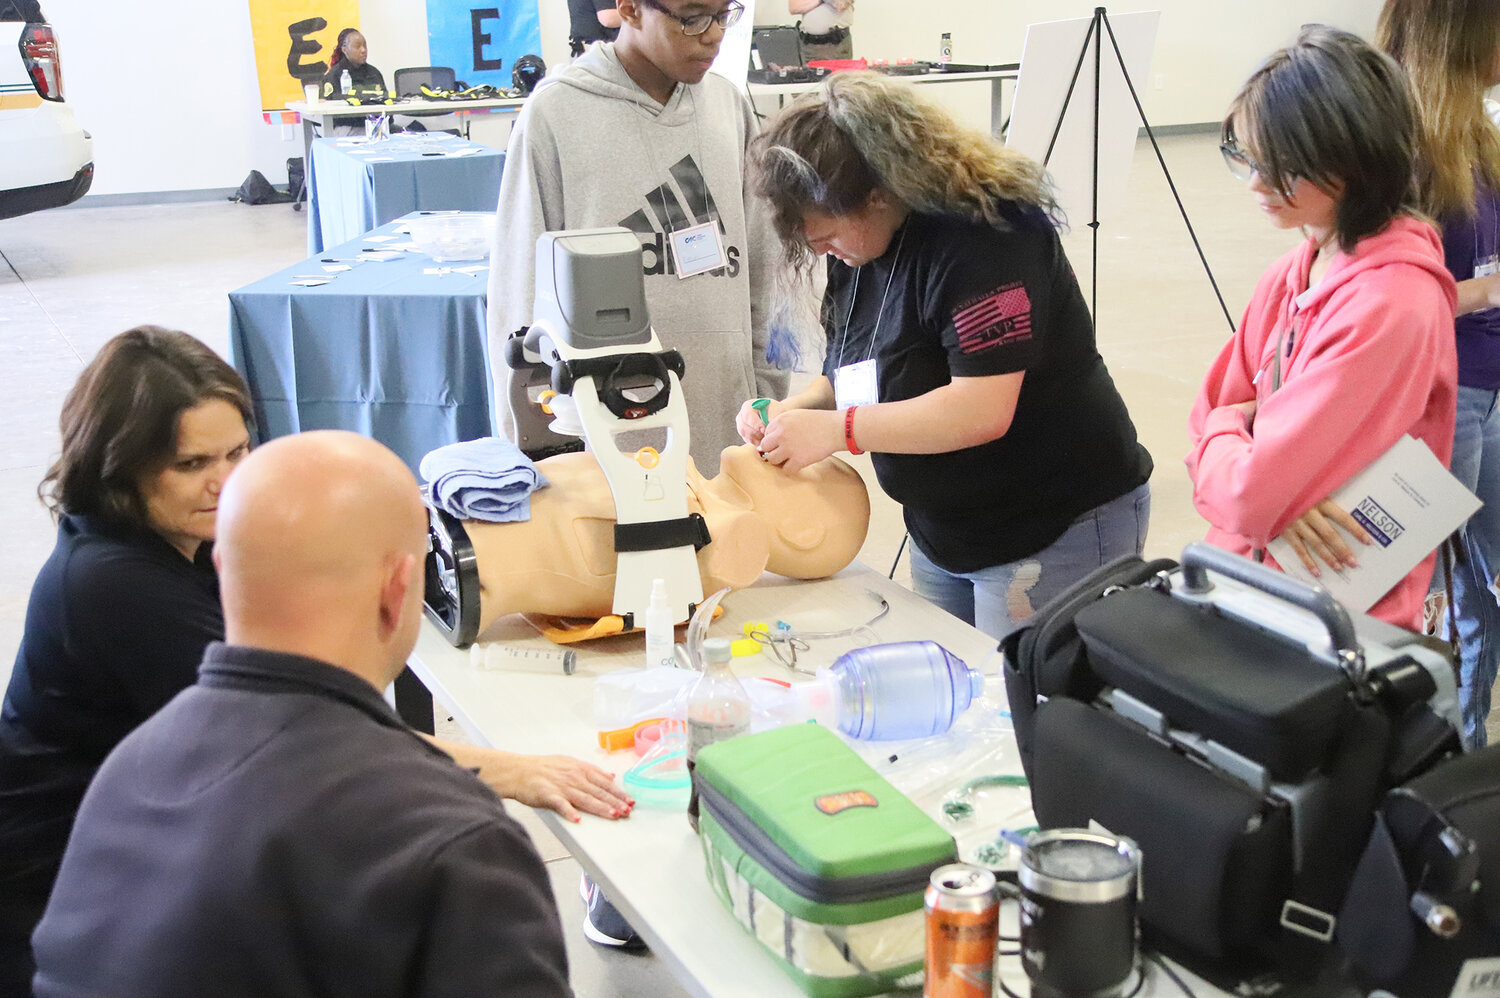 Students from Keokuk High School work on saving the life of a dummy in a simluation put on by Lee County EMS staffers Tuesday at the Career Advantage Center in Montrose.